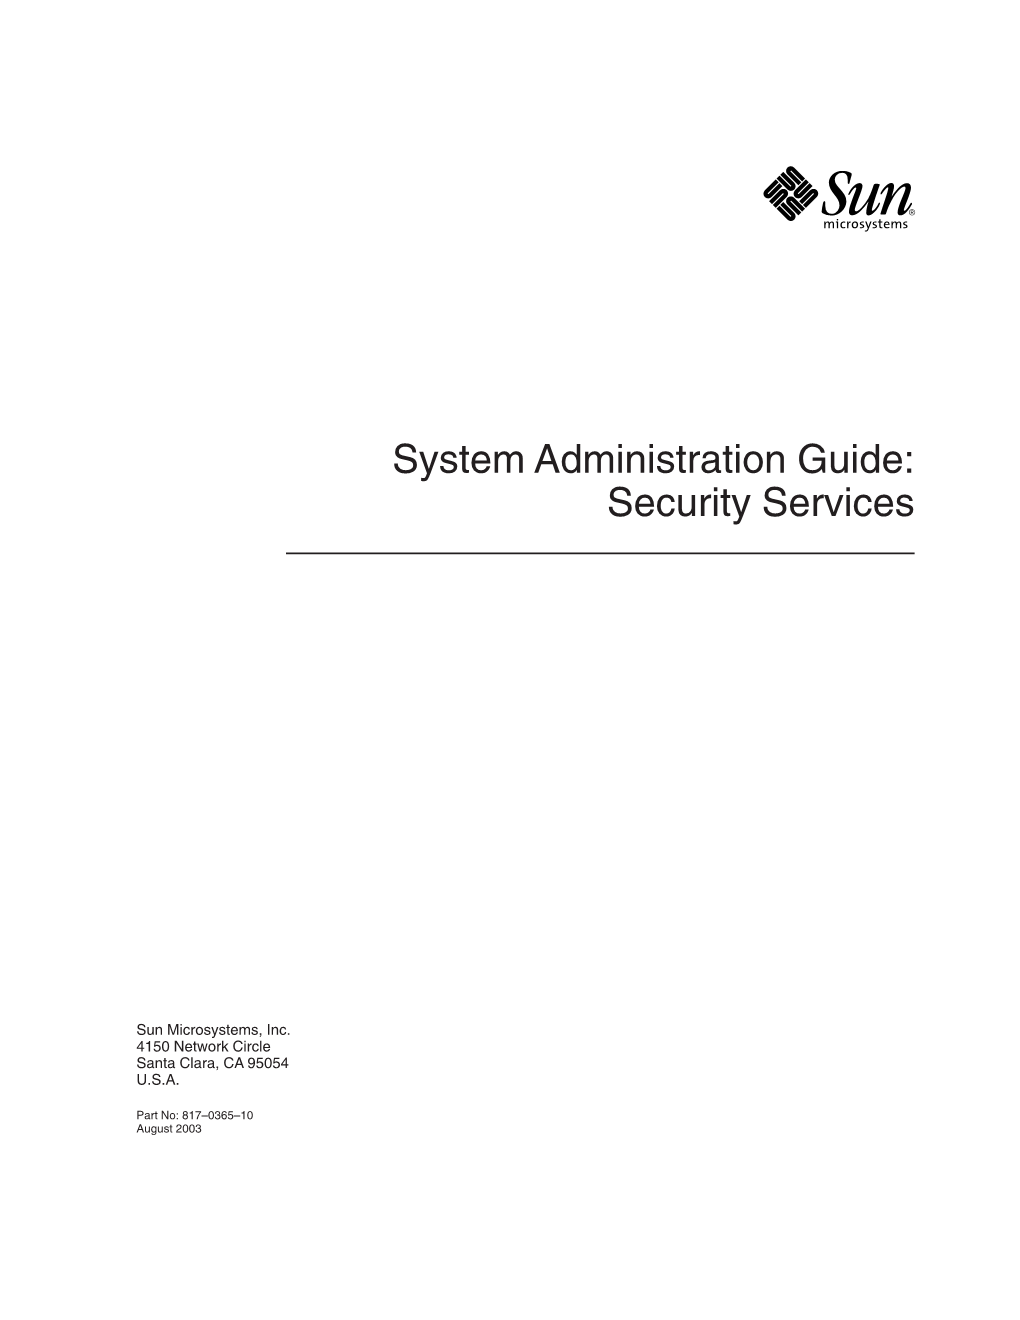 System Administration Guide: Security Services